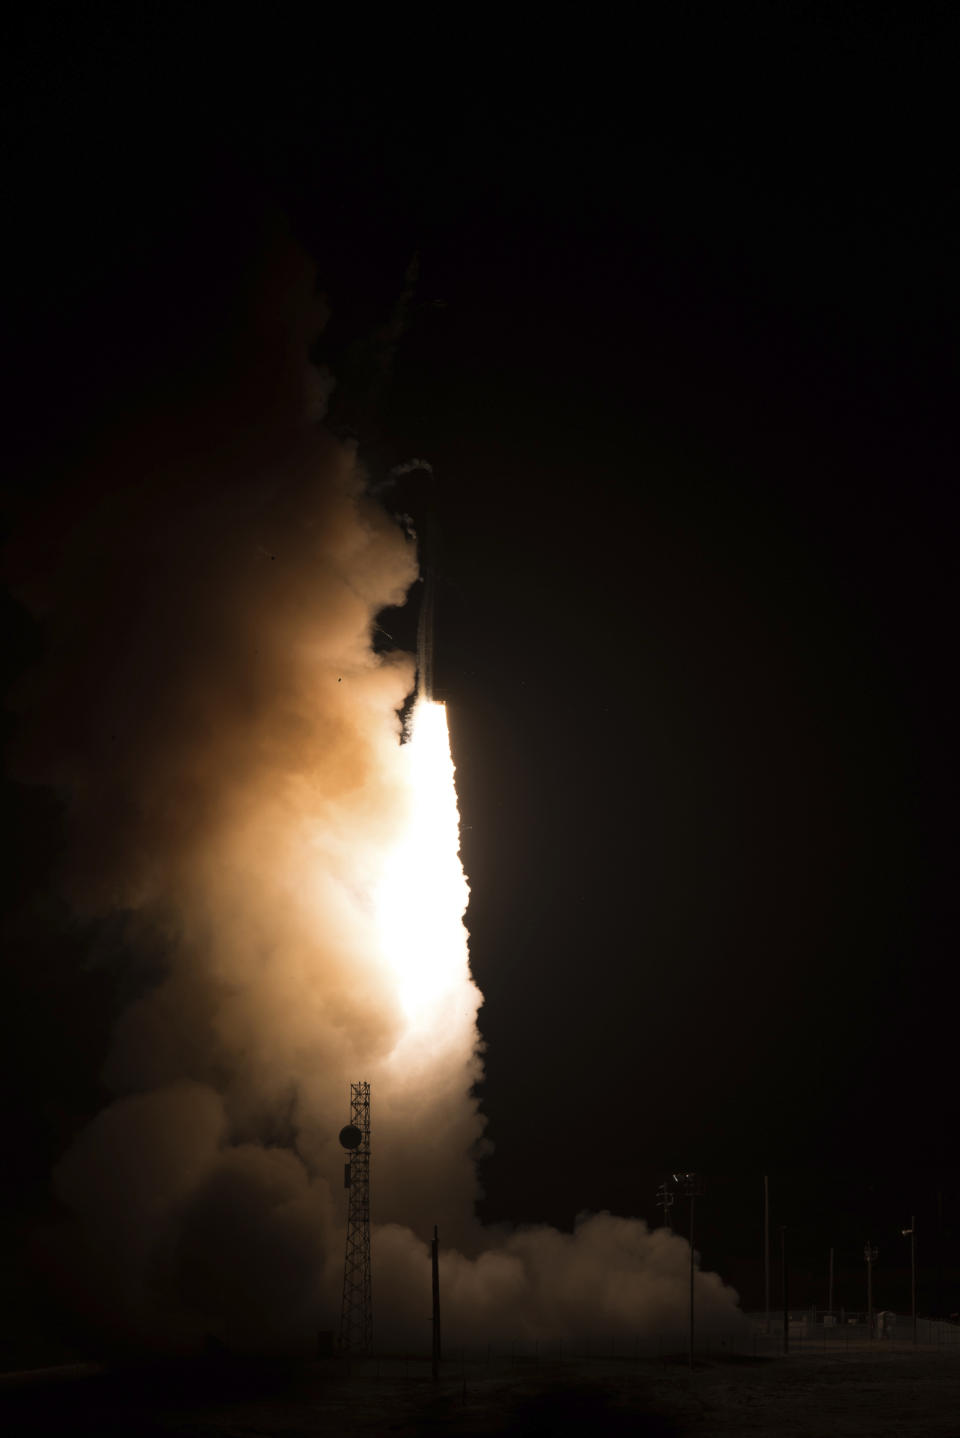 This image provided by the U.S. Air Force shows an unarmed Minuteman III intercontinental ballistic missile test launch early Tuesday, Oct. 2, 2019, at Vandenberg Air Force Base, Calif. (Michael Peterson/U.S. Air Force via AP)